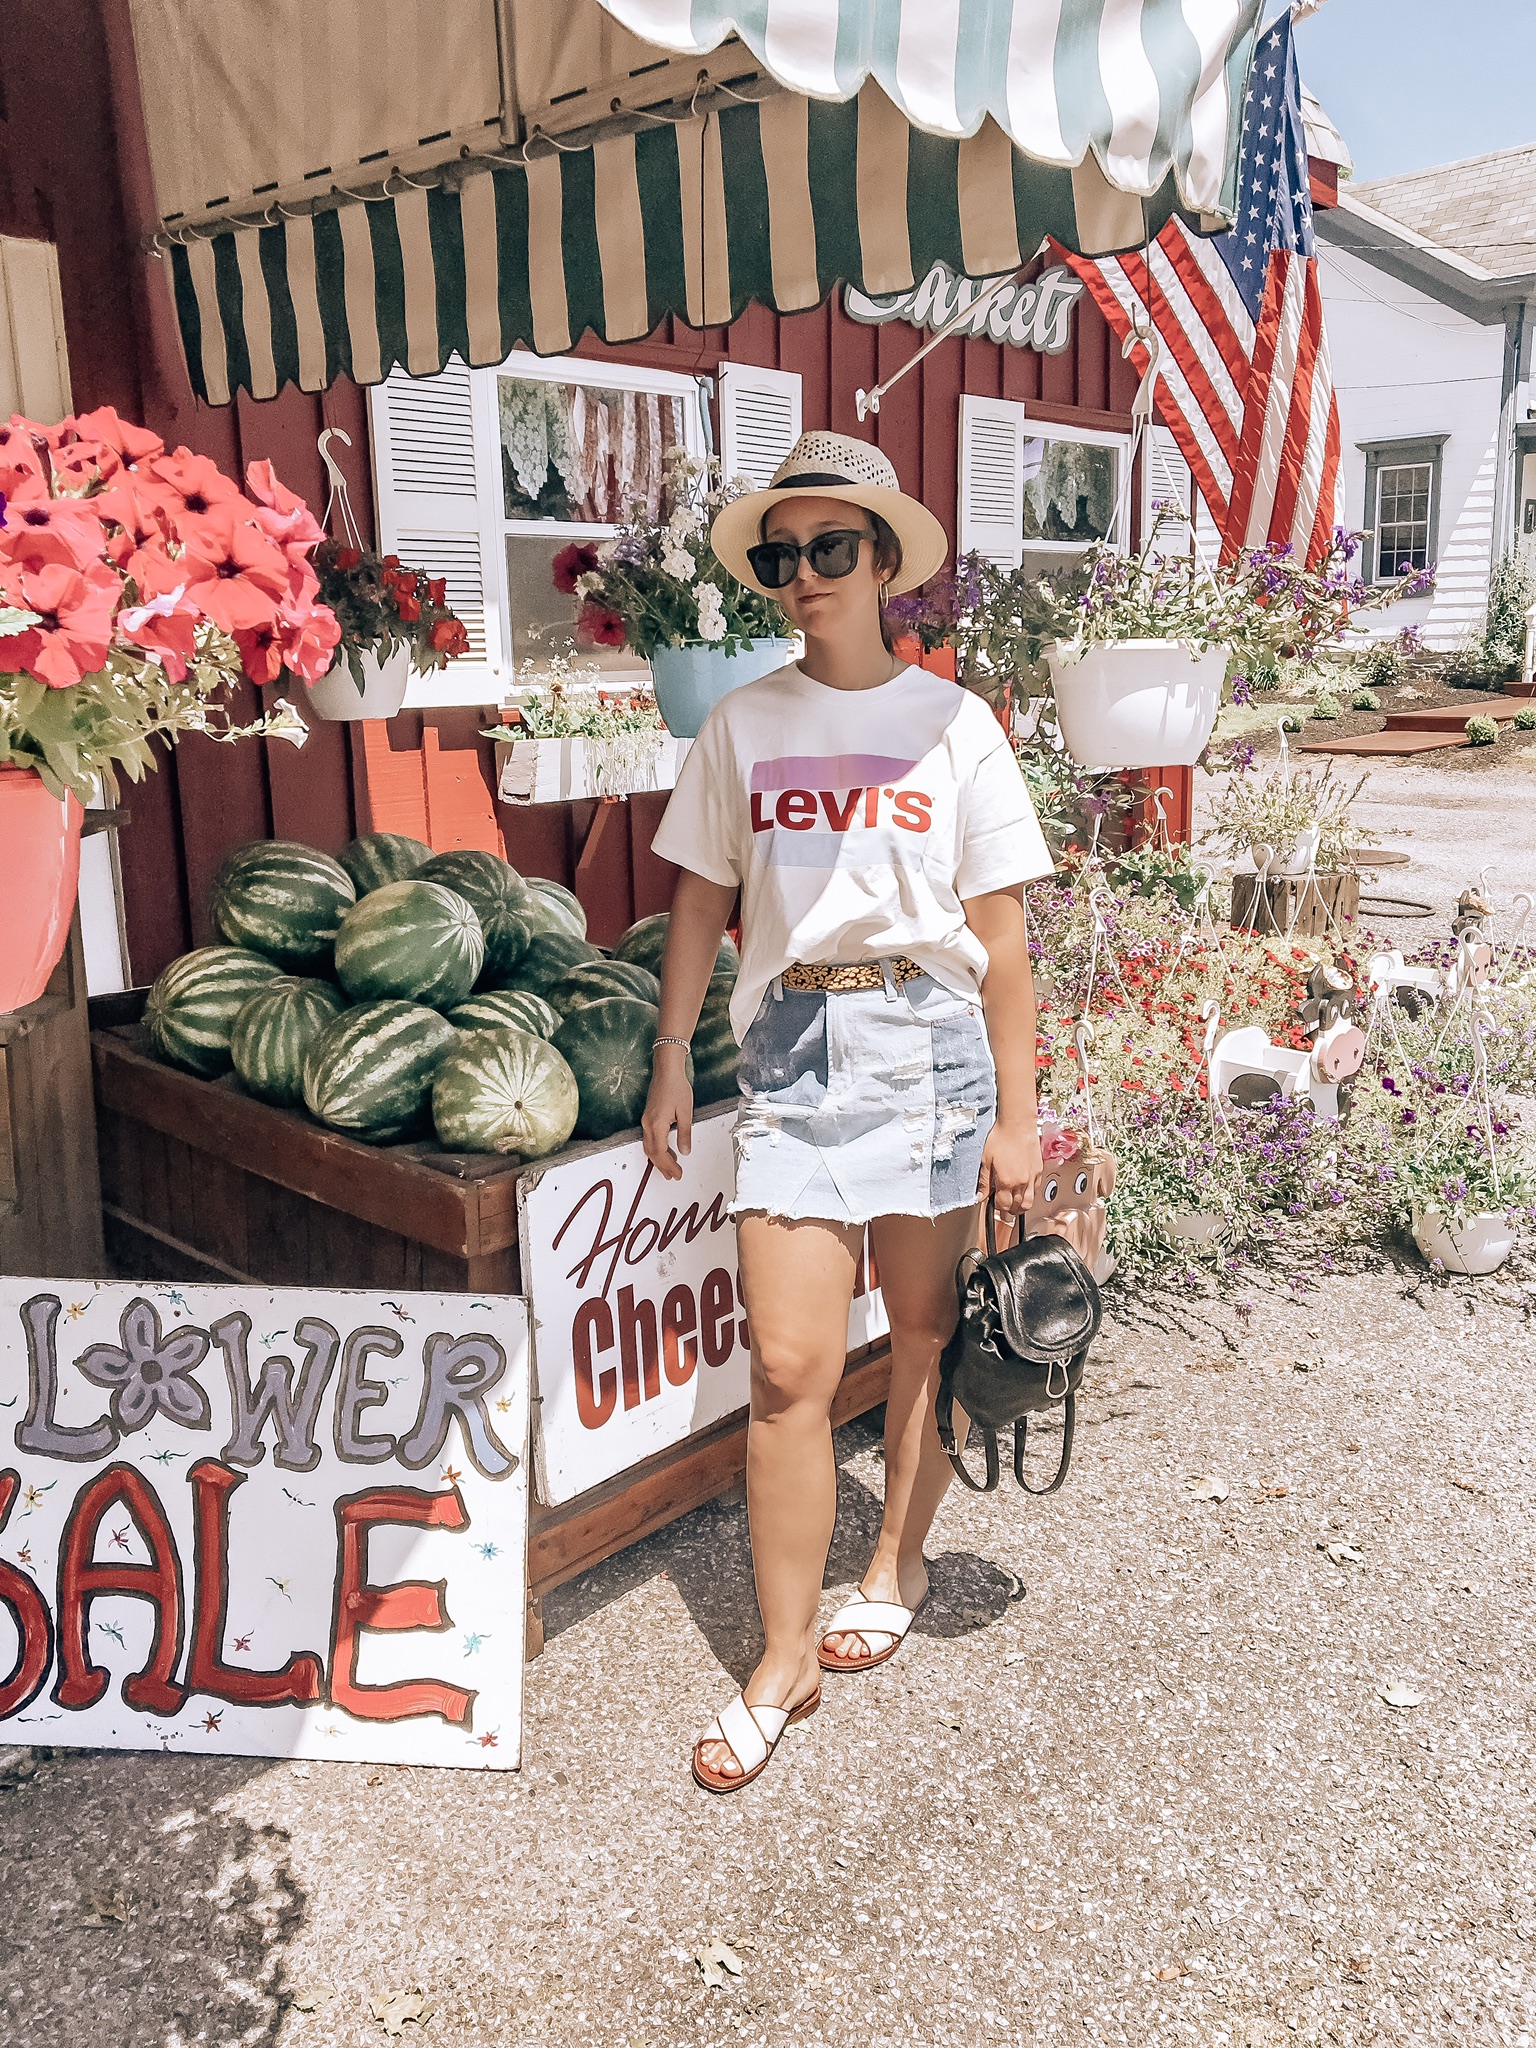 TEN Top 10 Things To Do On The North Fork This Summer #northfork #nofo #blogger #summer #sunflower #longisland #travel #vacation #summer #bloggerstyle #summerstyle #outfit #summeroutfit #travel #longisland #vacation #farmstand